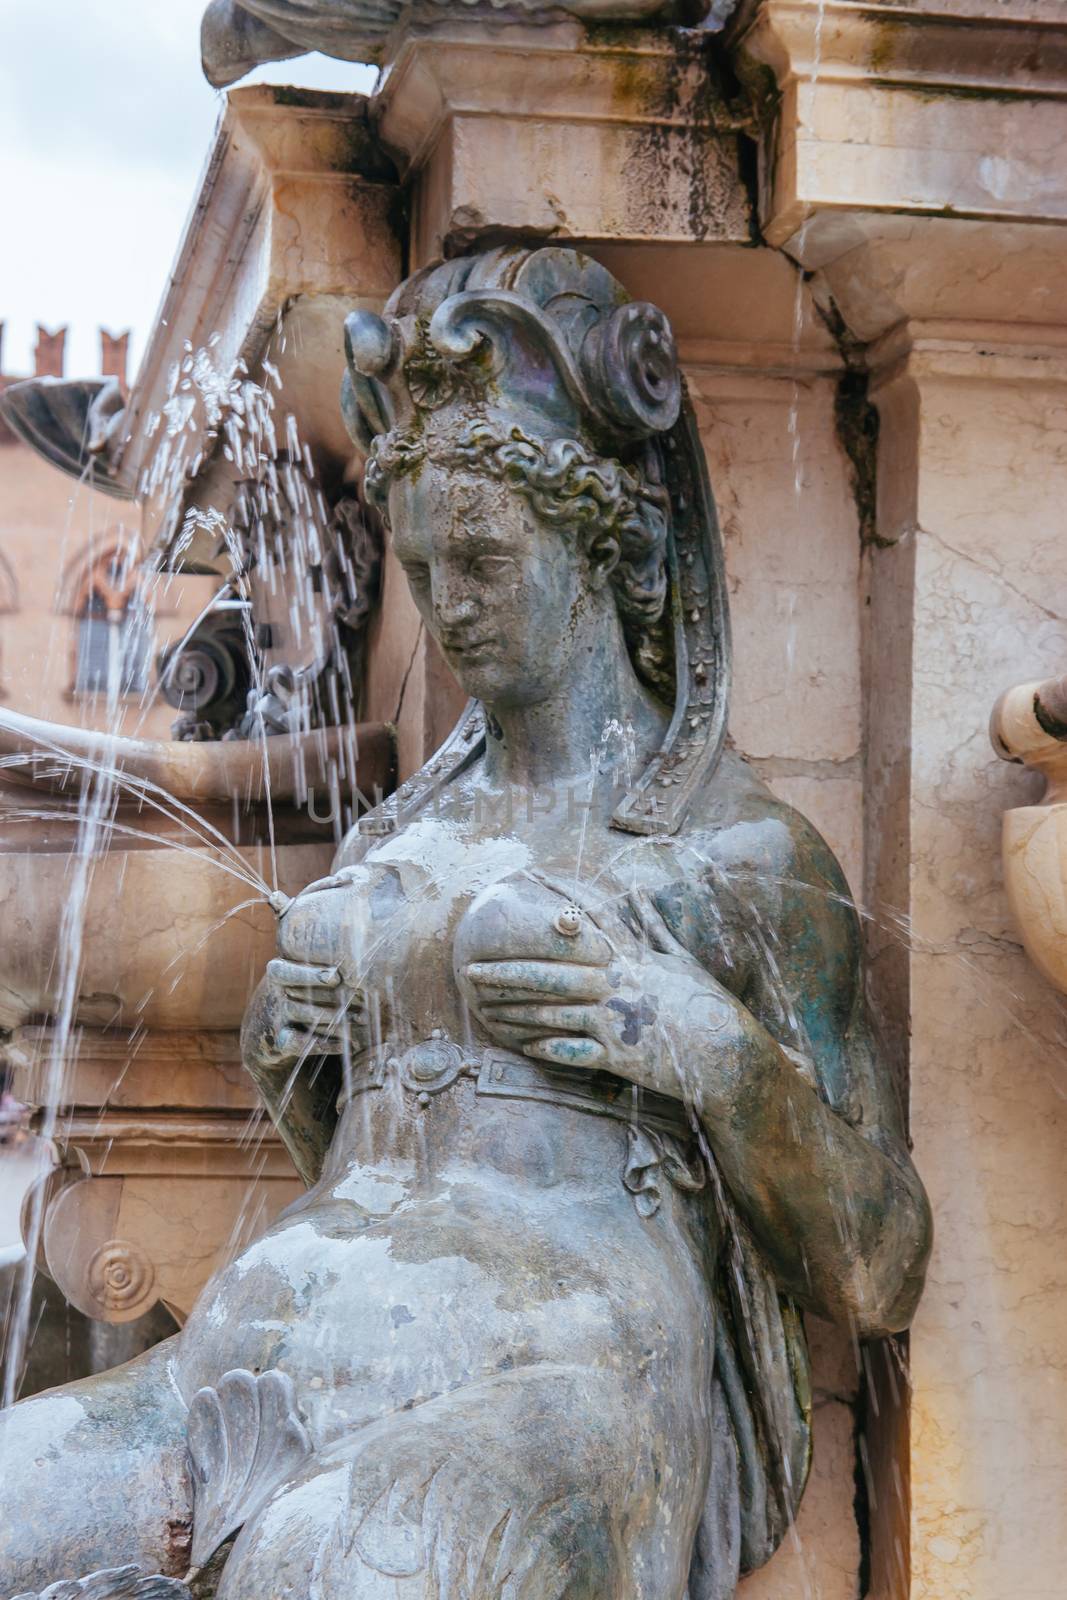 Fountain of Neptune in Bologna Italy by FiledIMAGE